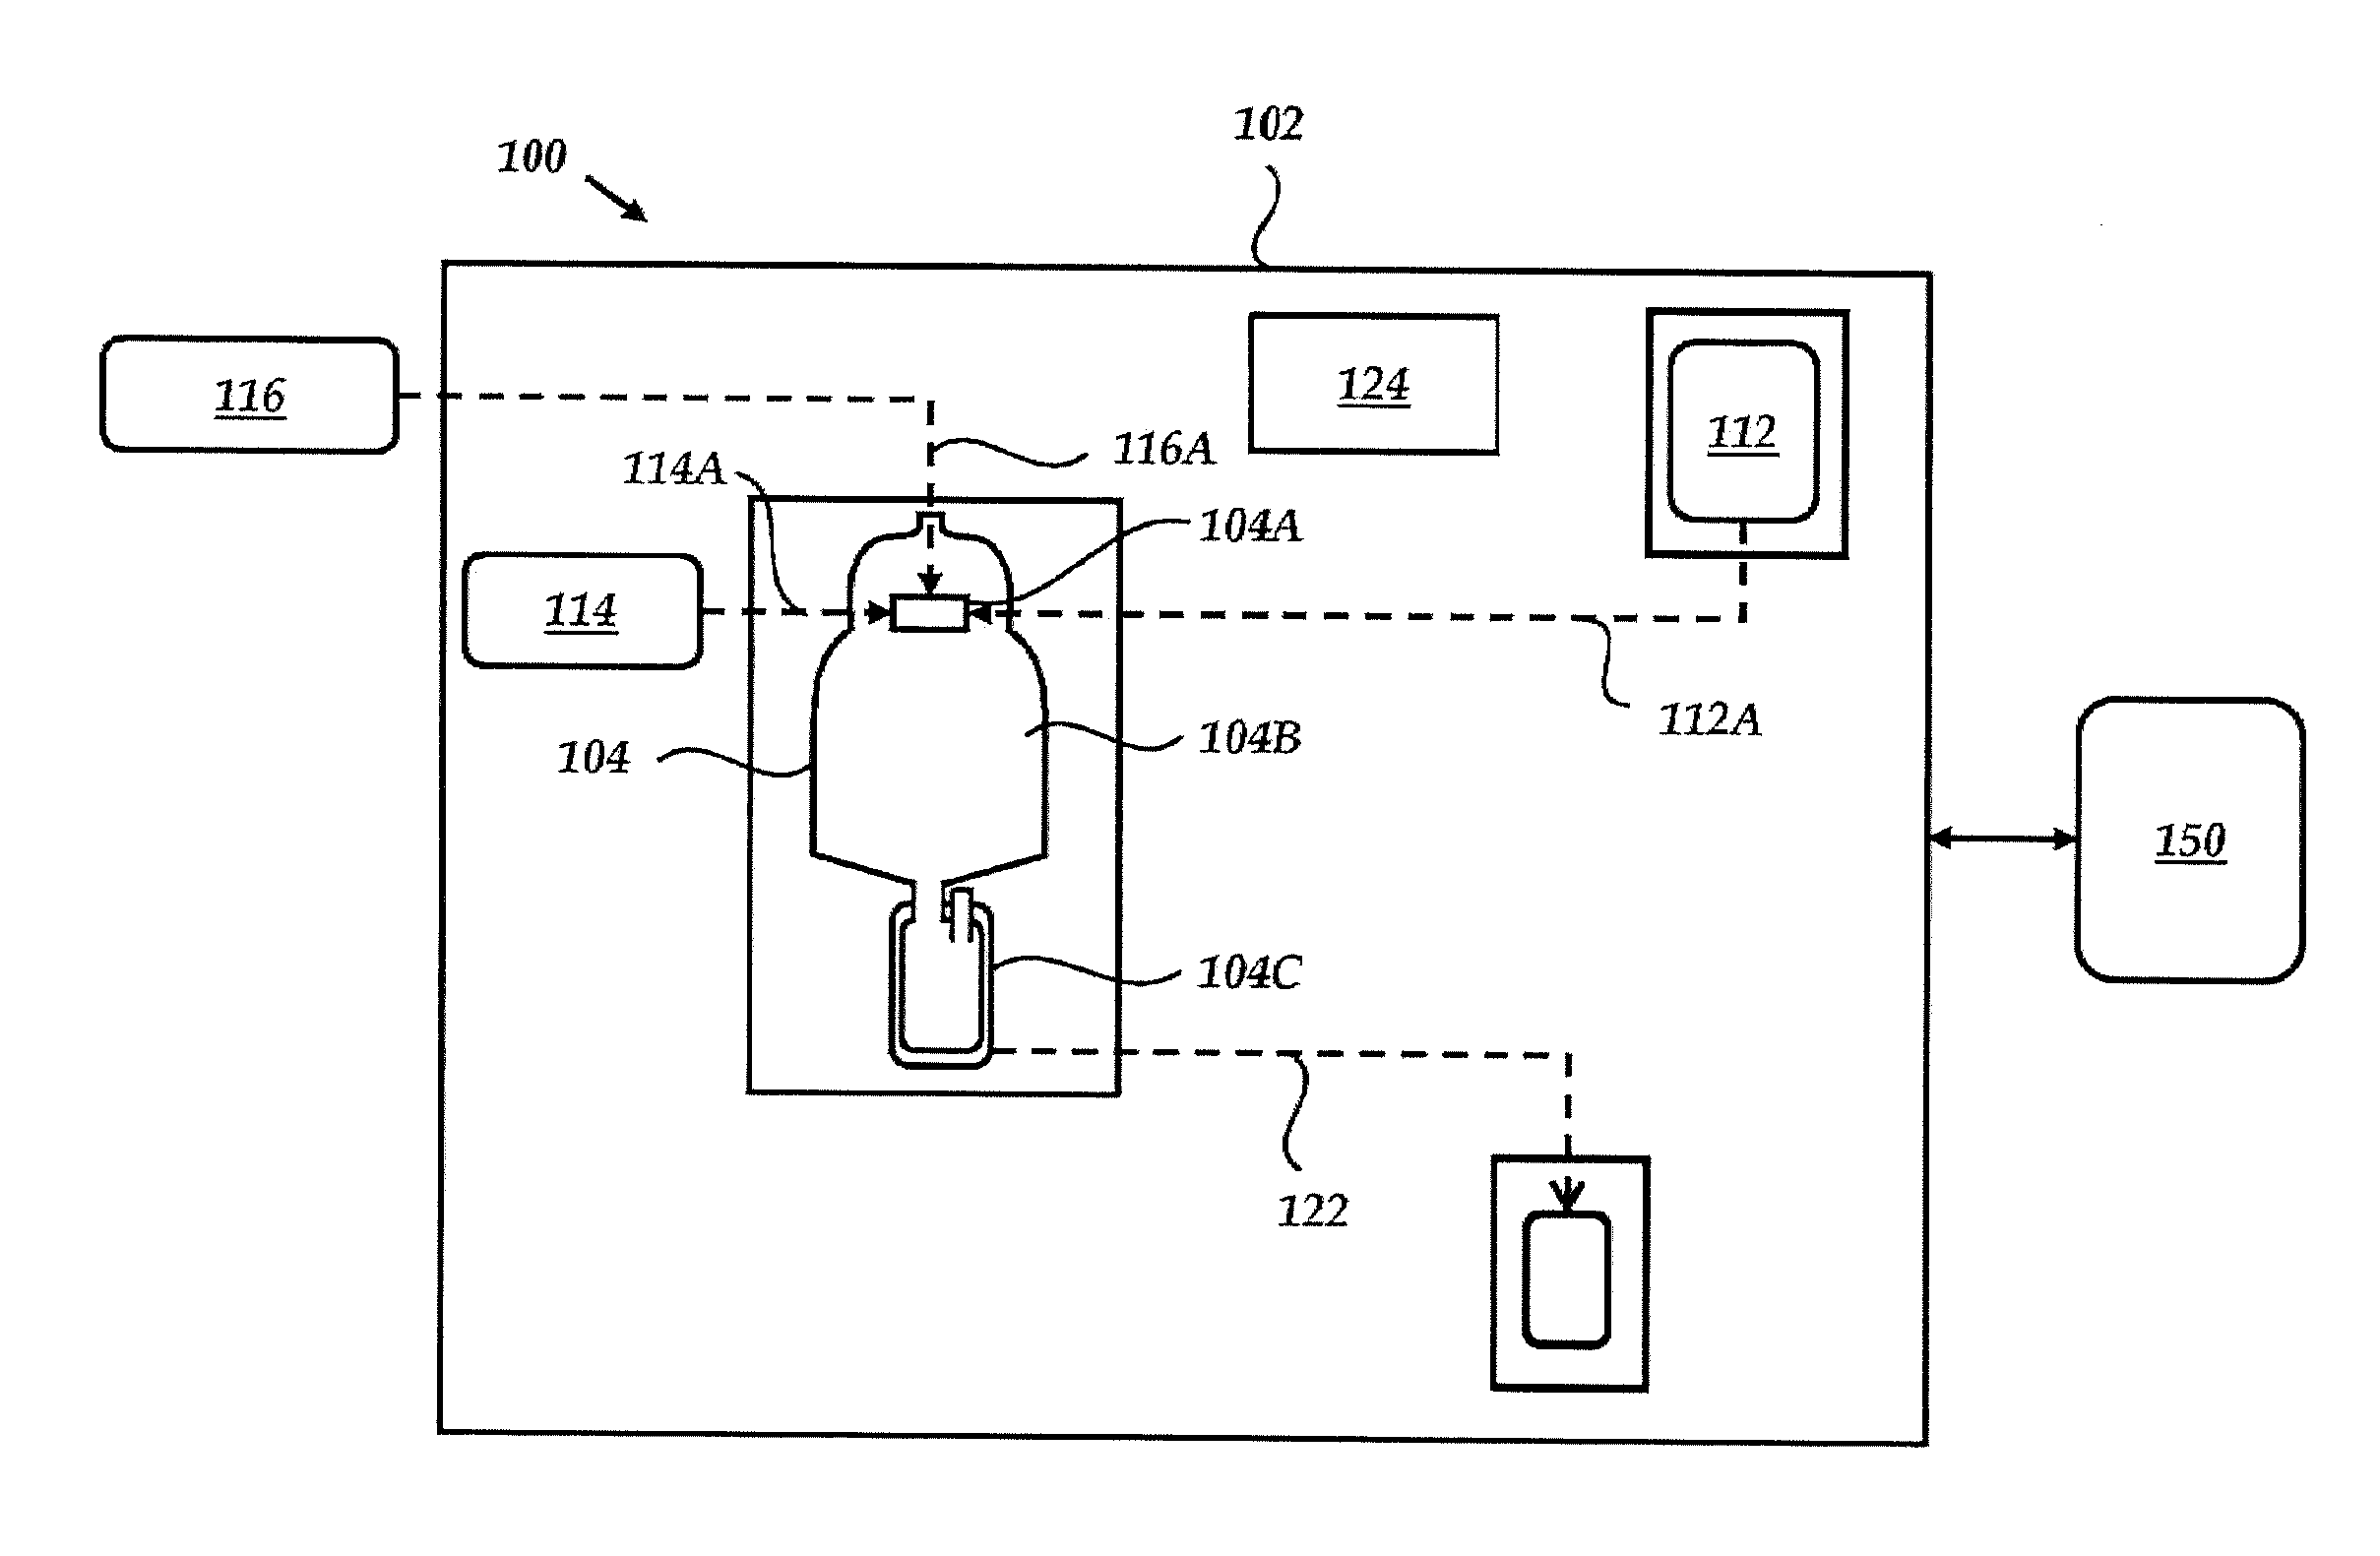 Process control methods for obtaining and maintaining a desired moisture content of spray dried plasma